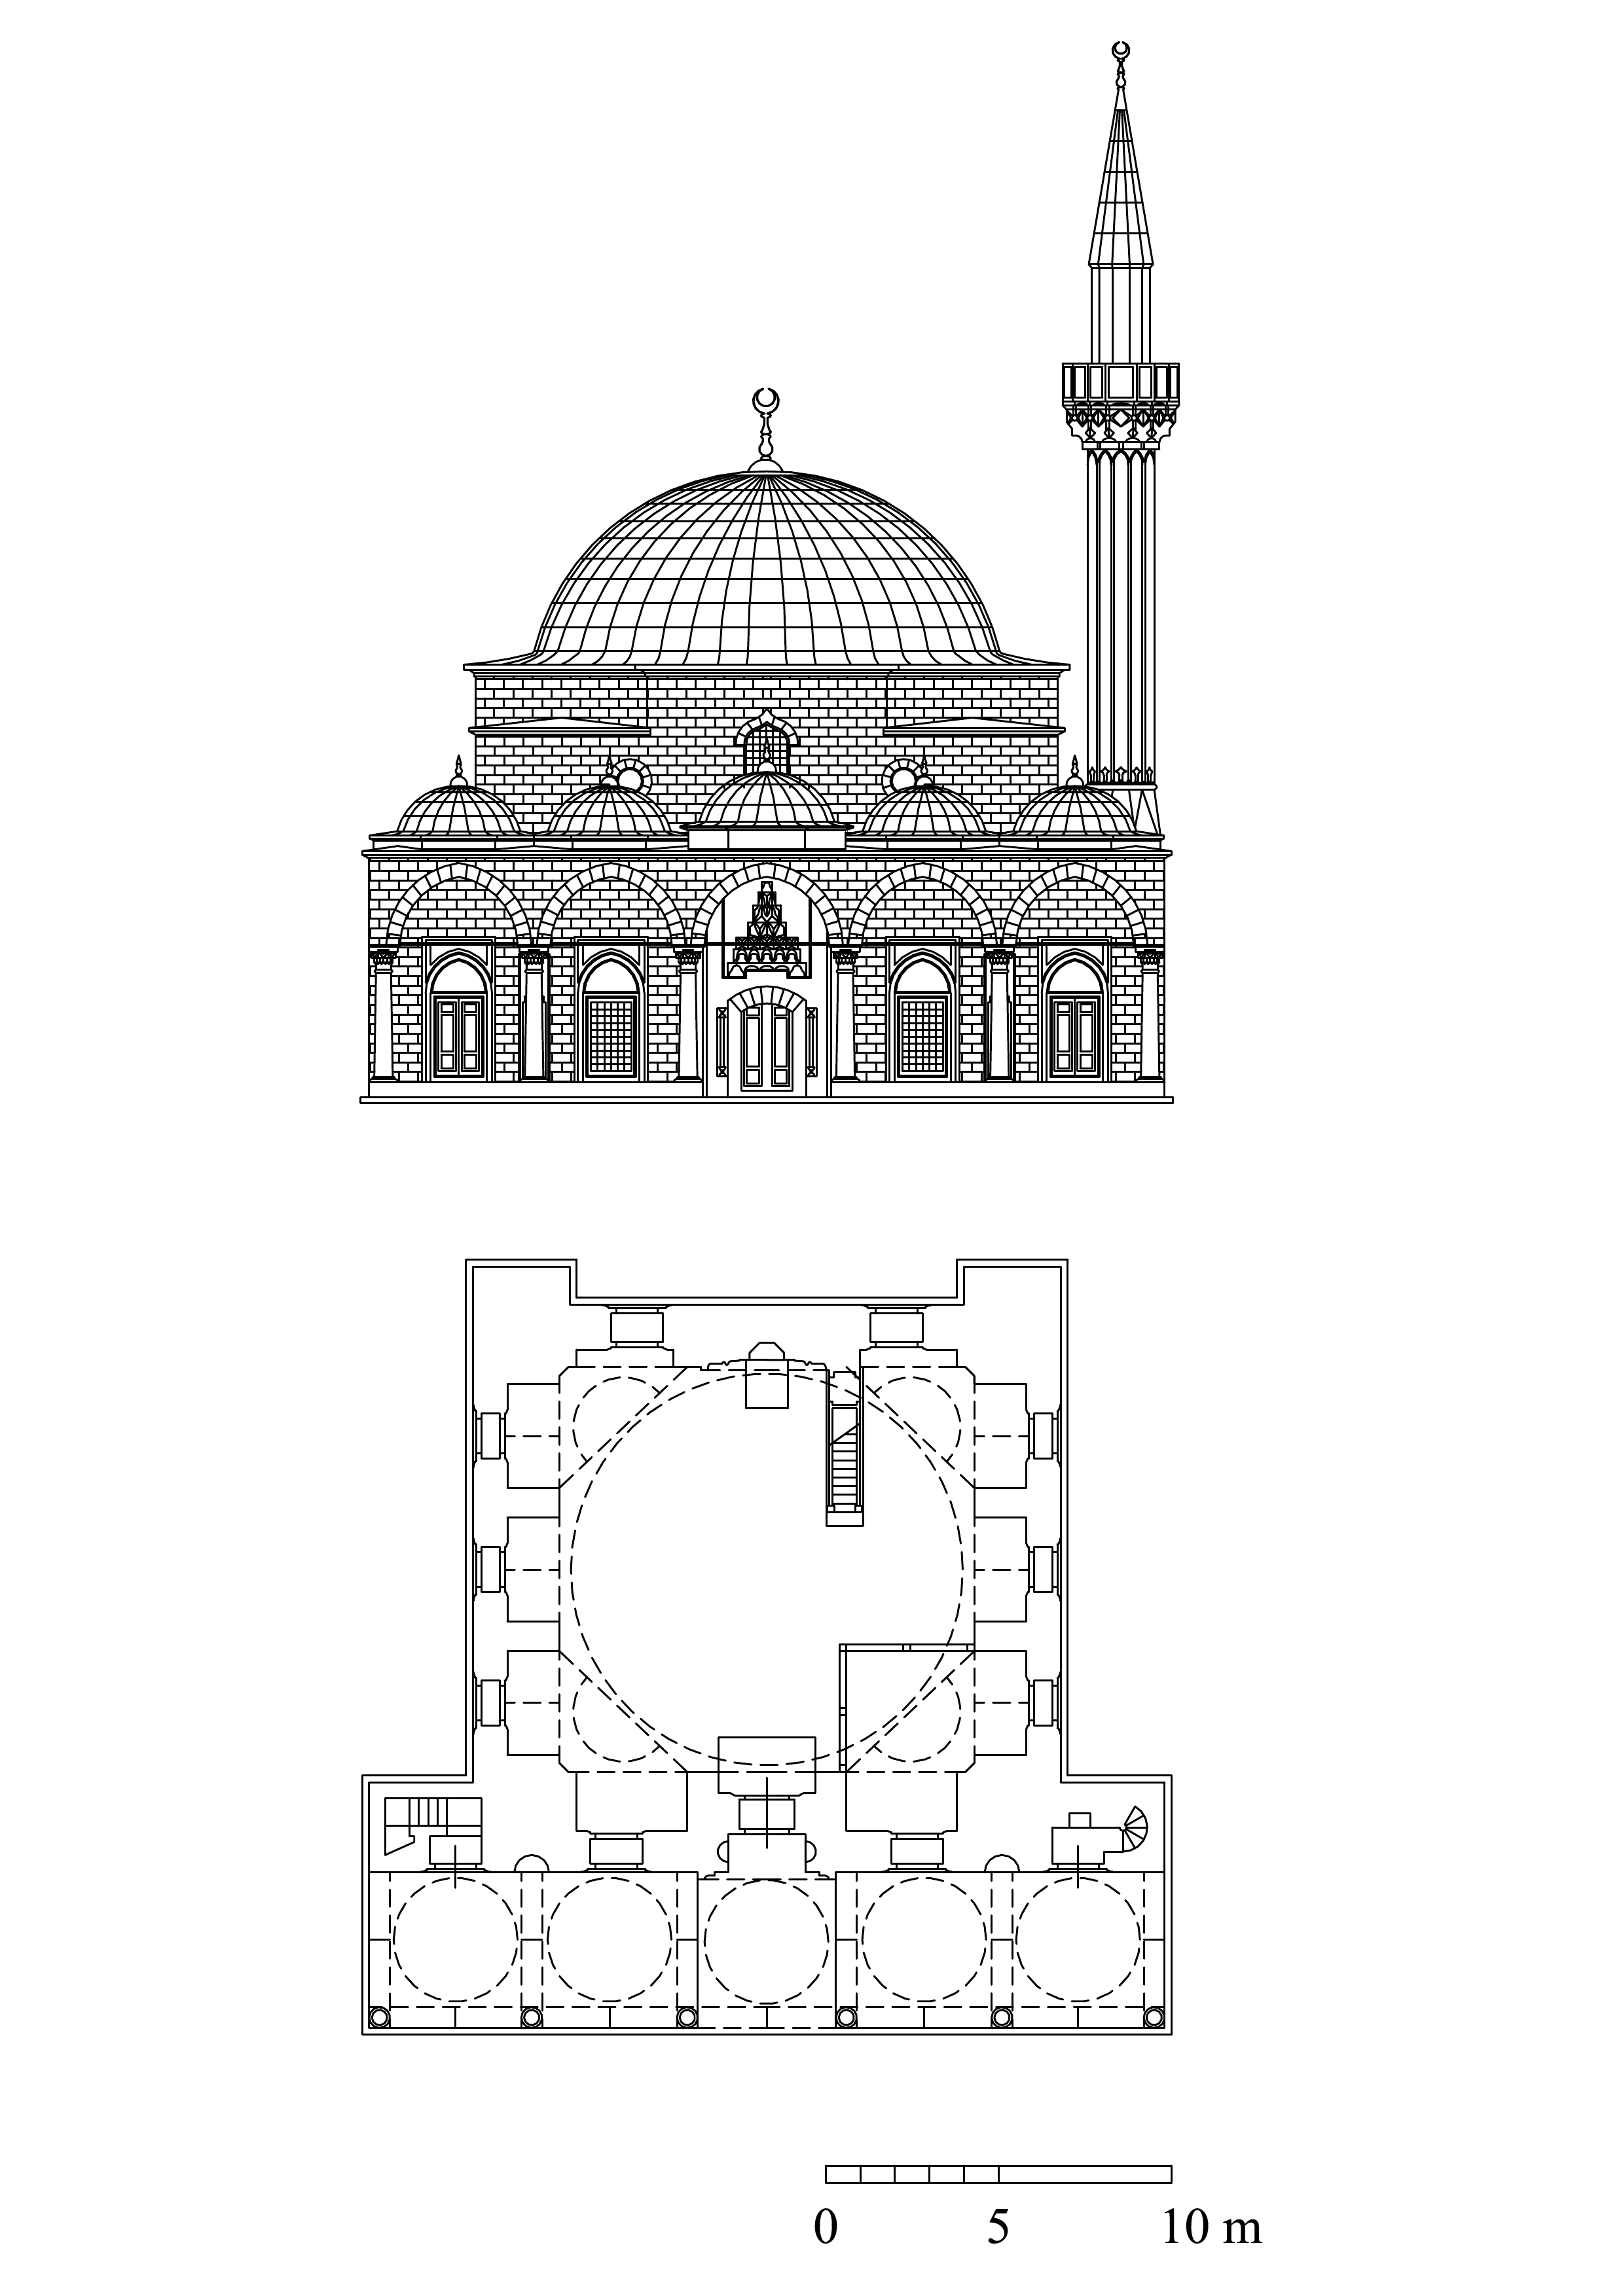 Floor plan and elevation of Bali Pasa Mosque